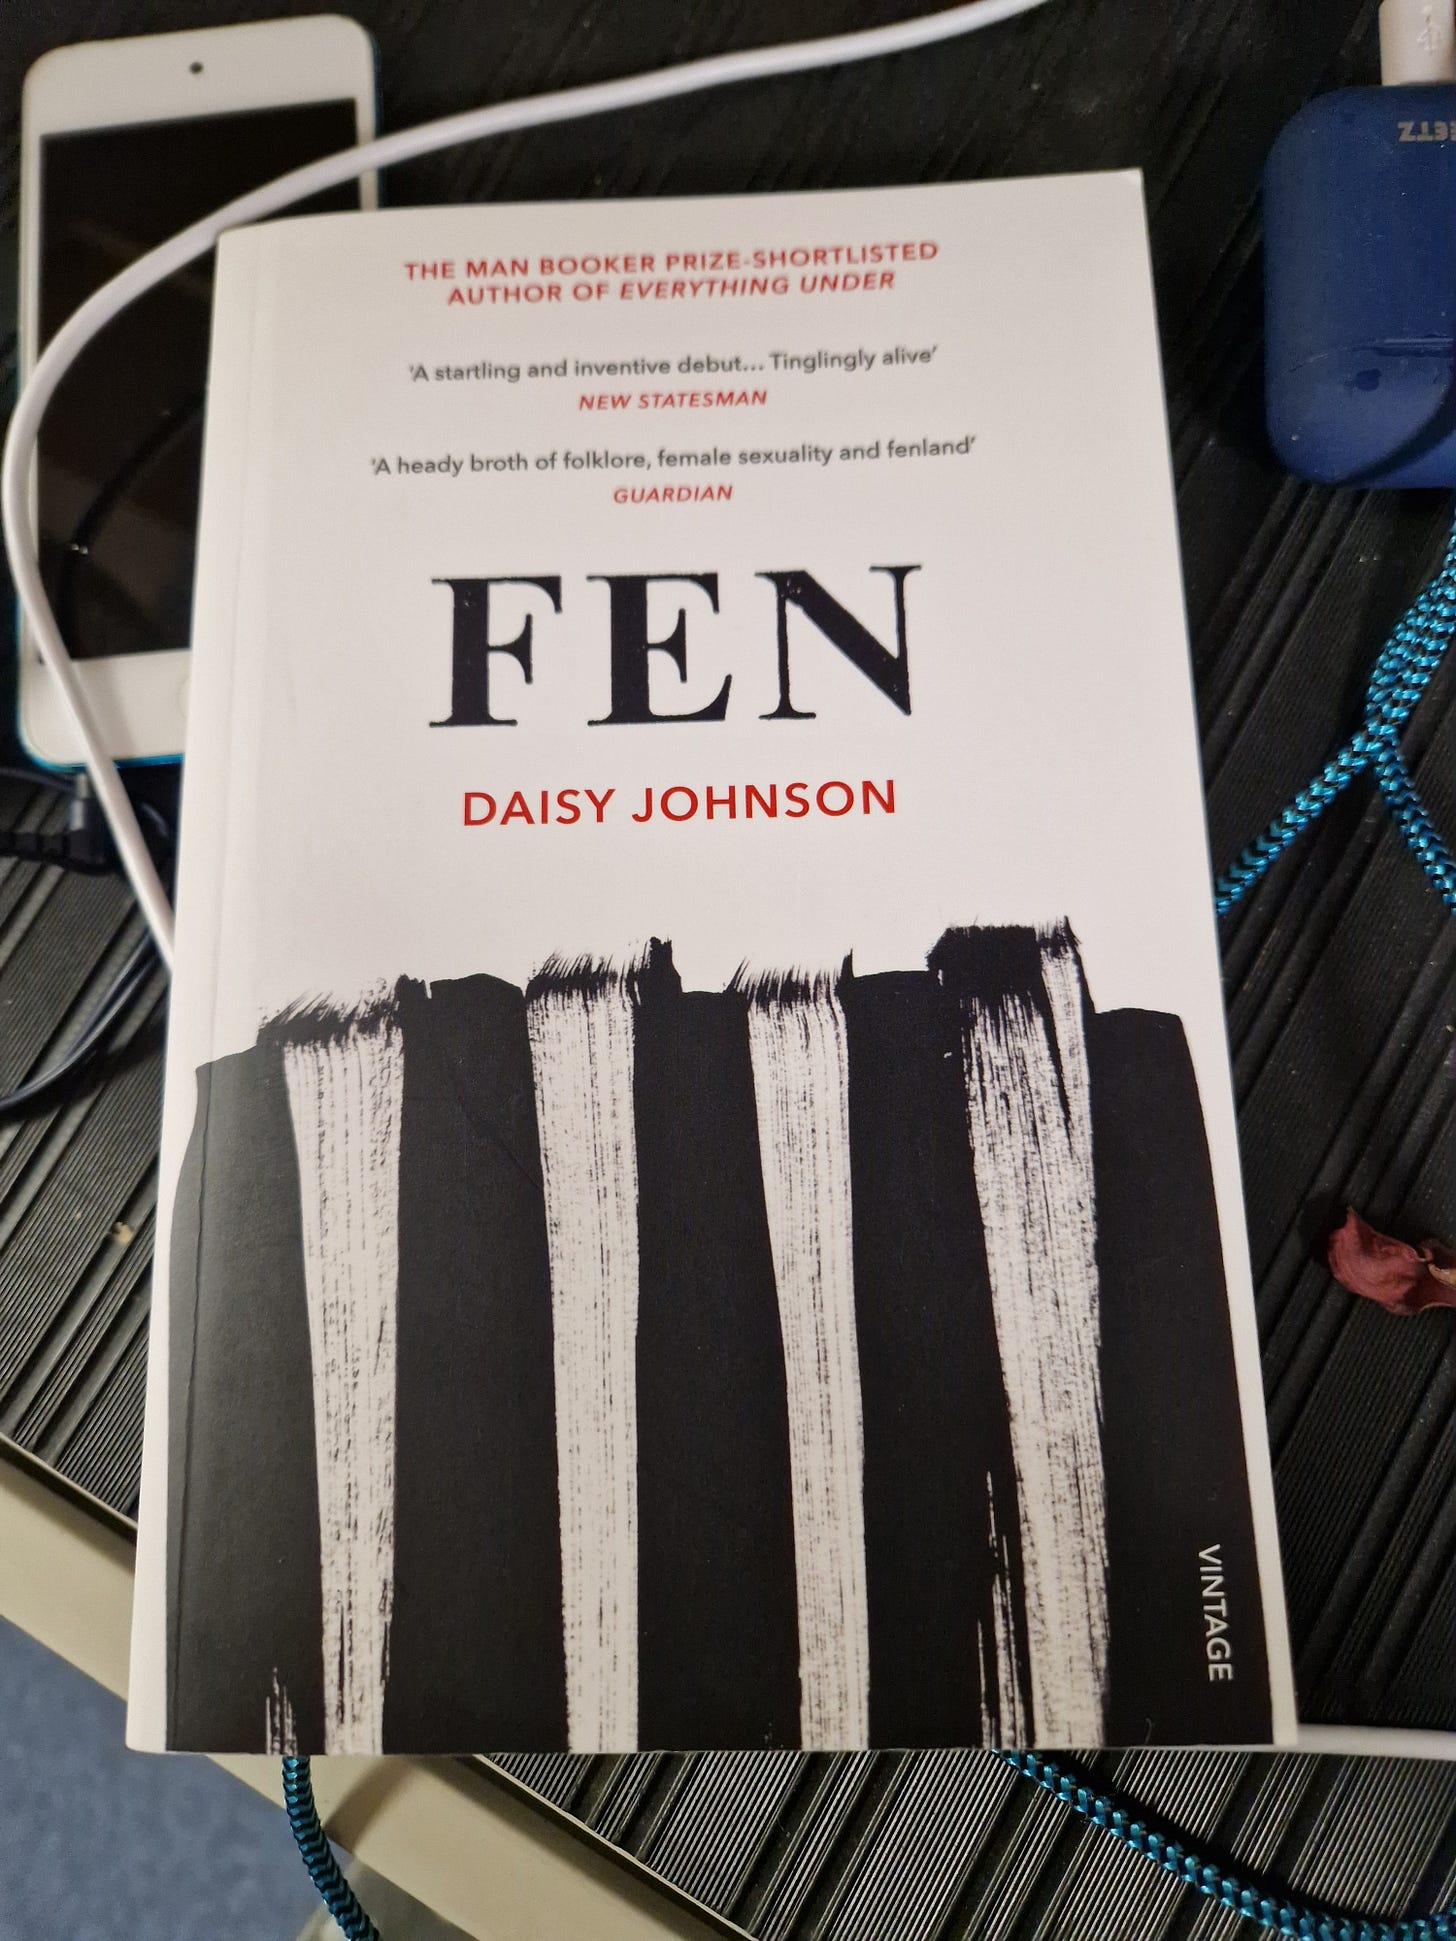 The front cover of 'Fen' by Daisy Johnson